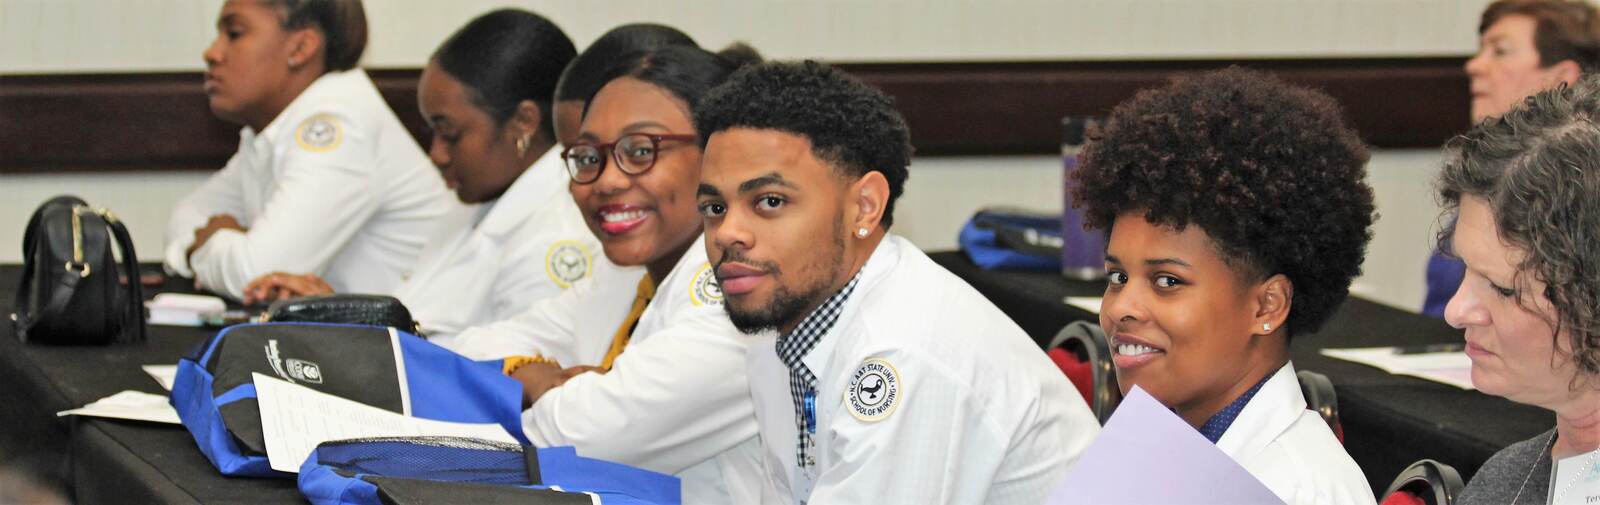 North Carolina A&T State University nursing students attend connection academy conference